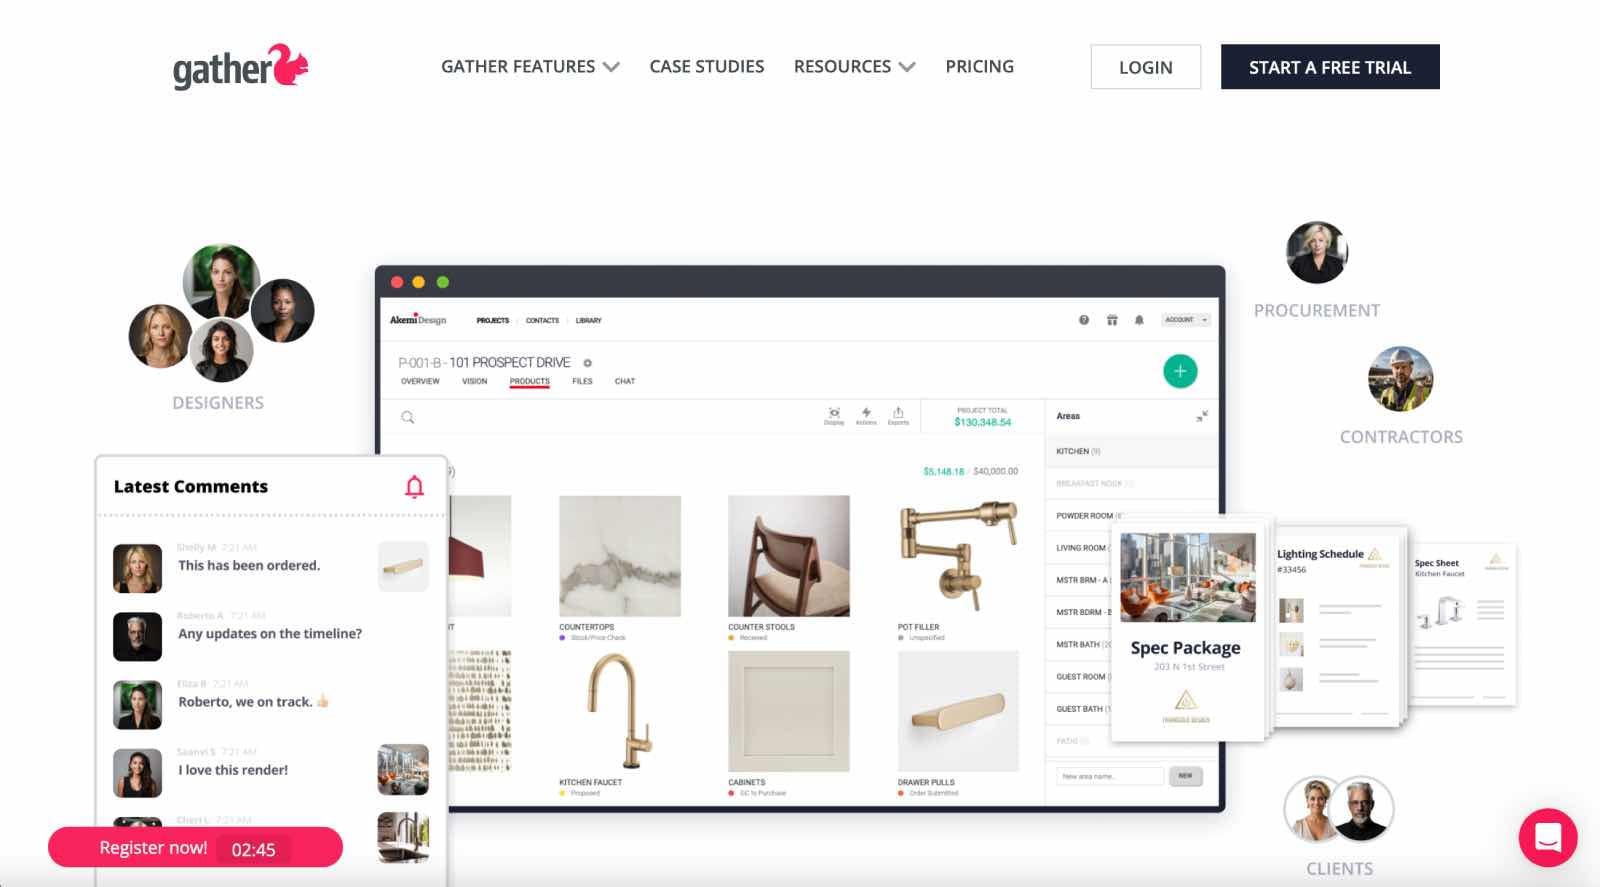 project management software for interior design gather